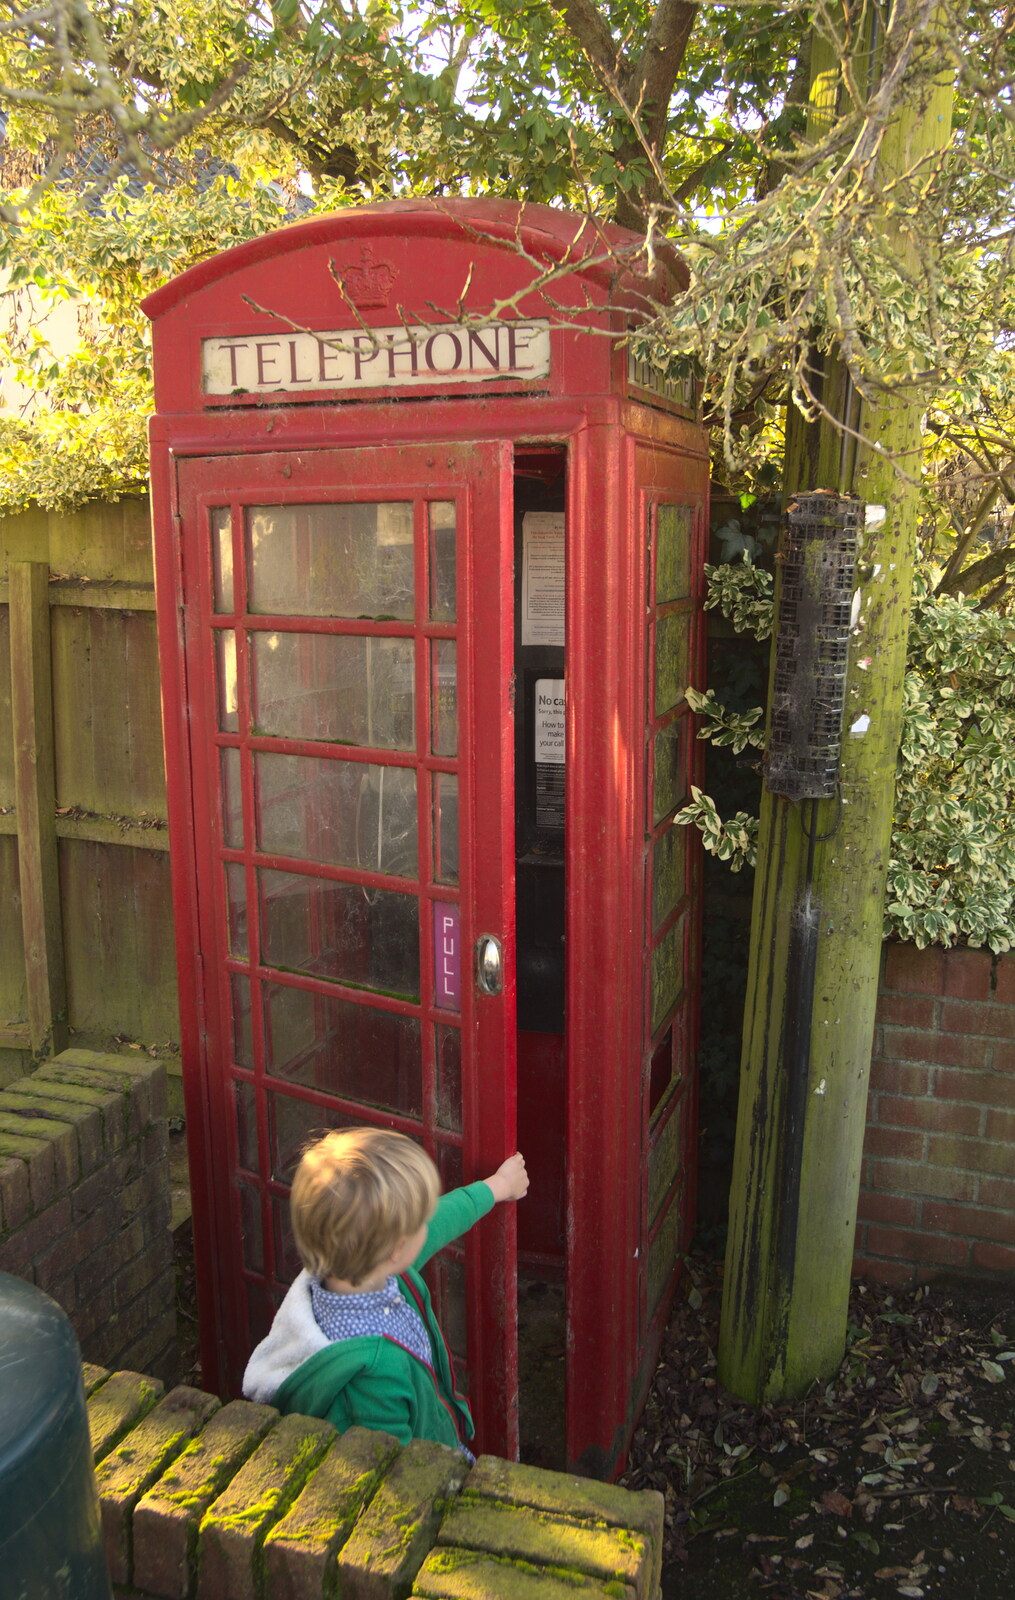 Jack's Birthday and New Windows, Brome and Brockdish, Norfolk - 4th December 2016: Harry explores a K6 phone box